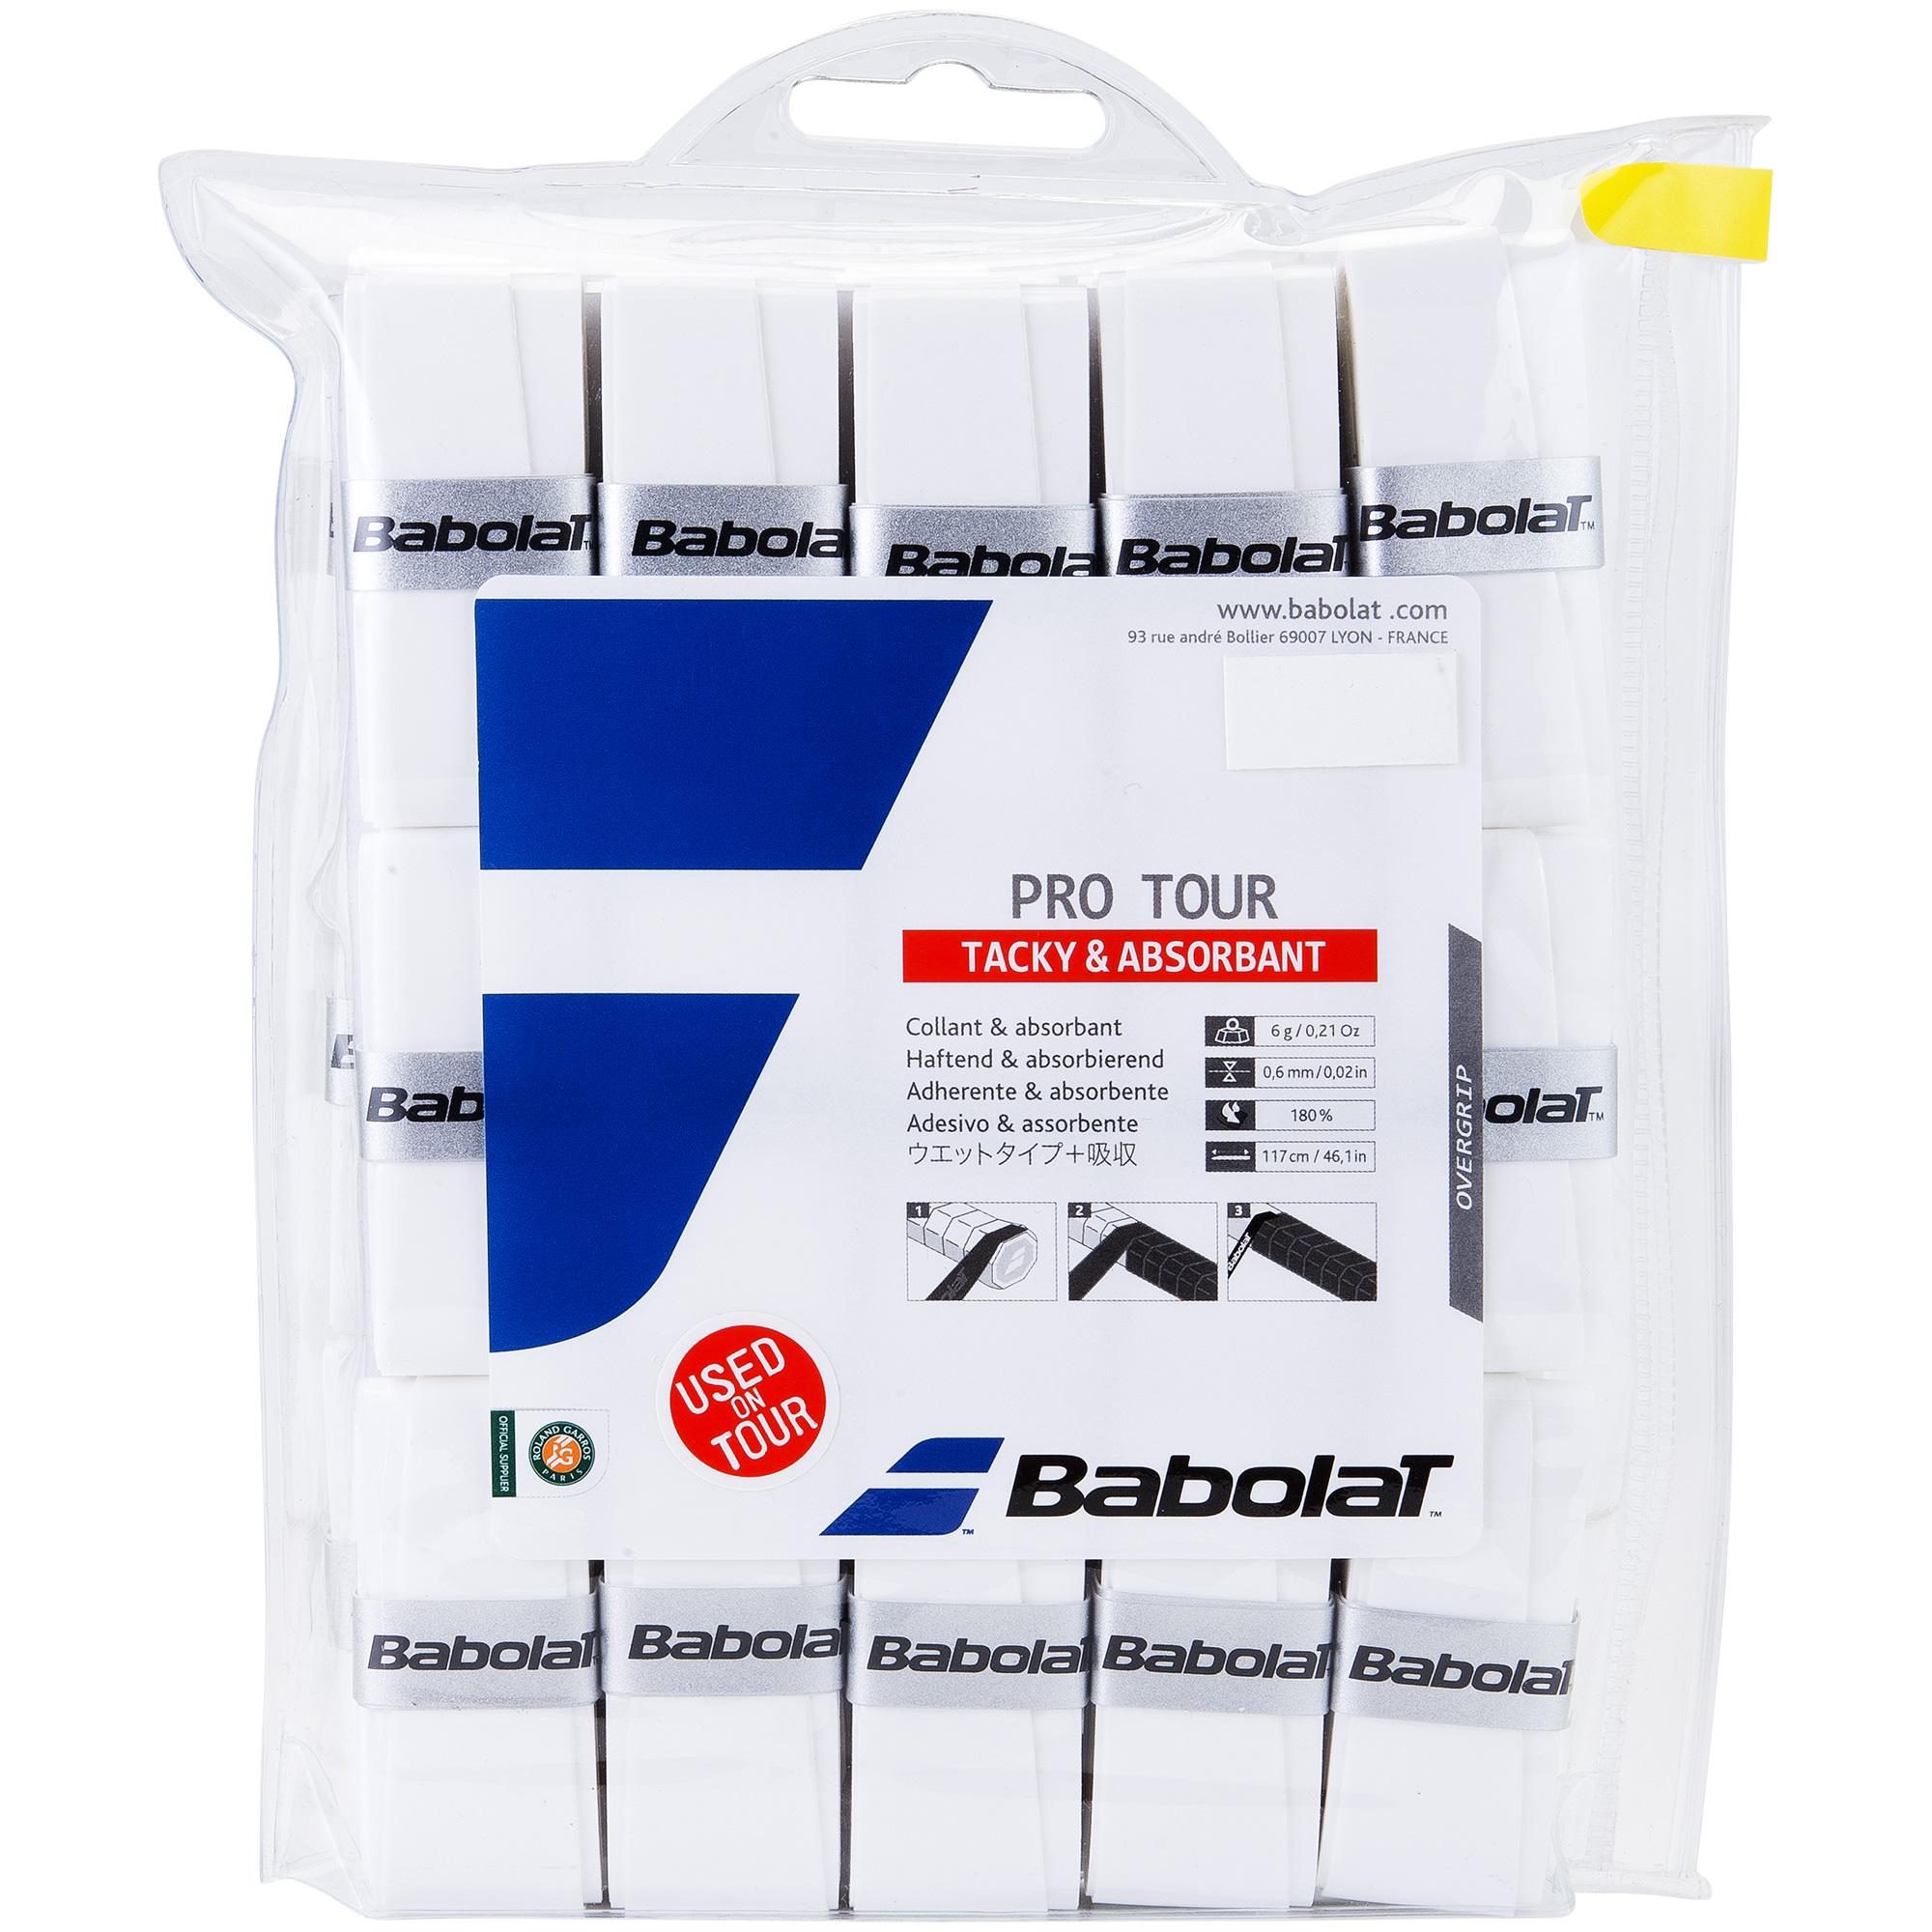 3 grips 1xBabolat Pro Tour White Overgrip Tennis grips dpd 1 day uk delivery